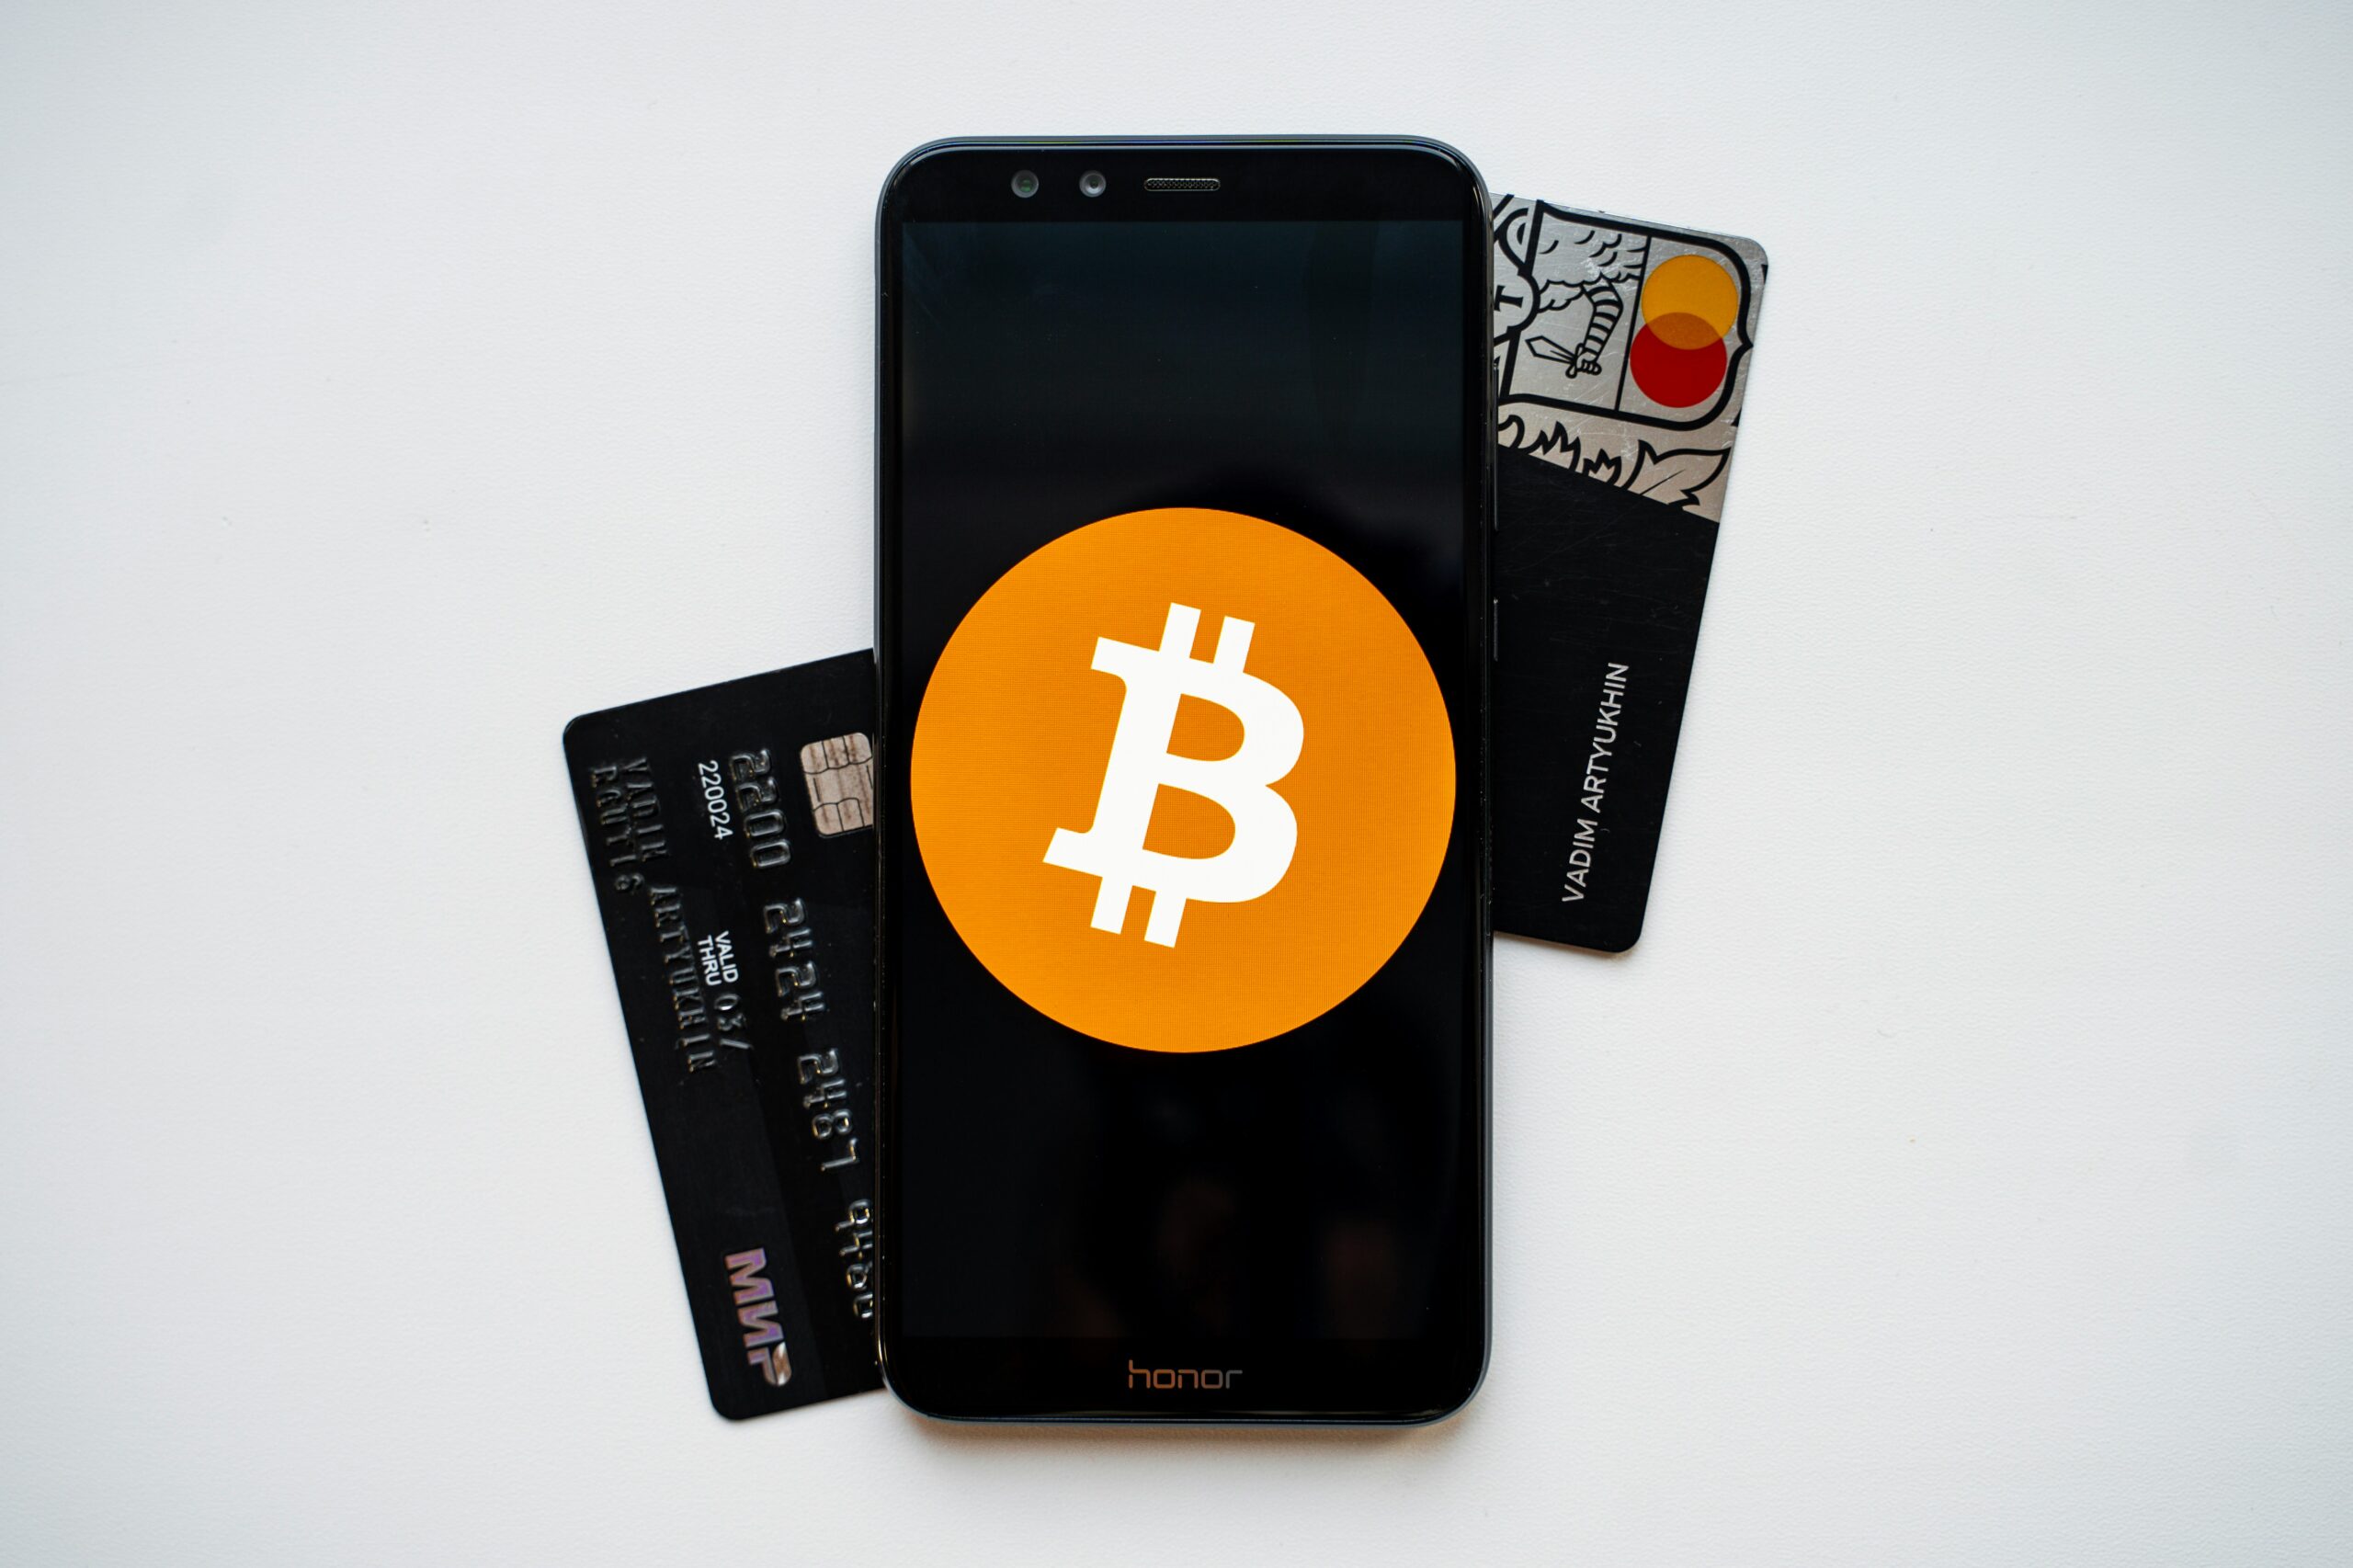 Two crypto credit cards and a smartphone with the Bitcoin symbol on the screen